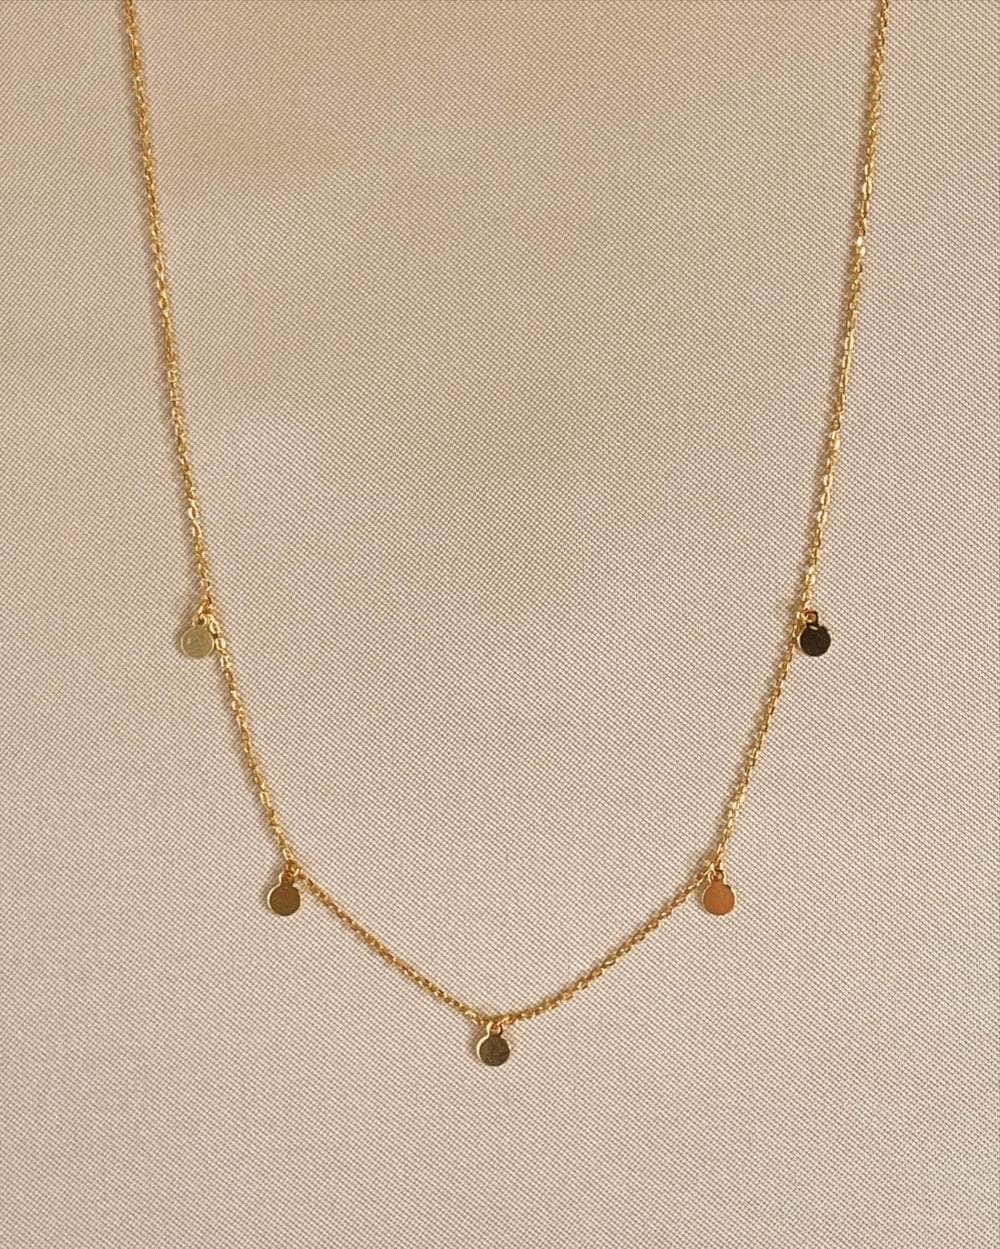 So Dainty Co. Necklaces Gwen Gold Choker Necklace Gold Plated 925 Sterling Silver Jewelry